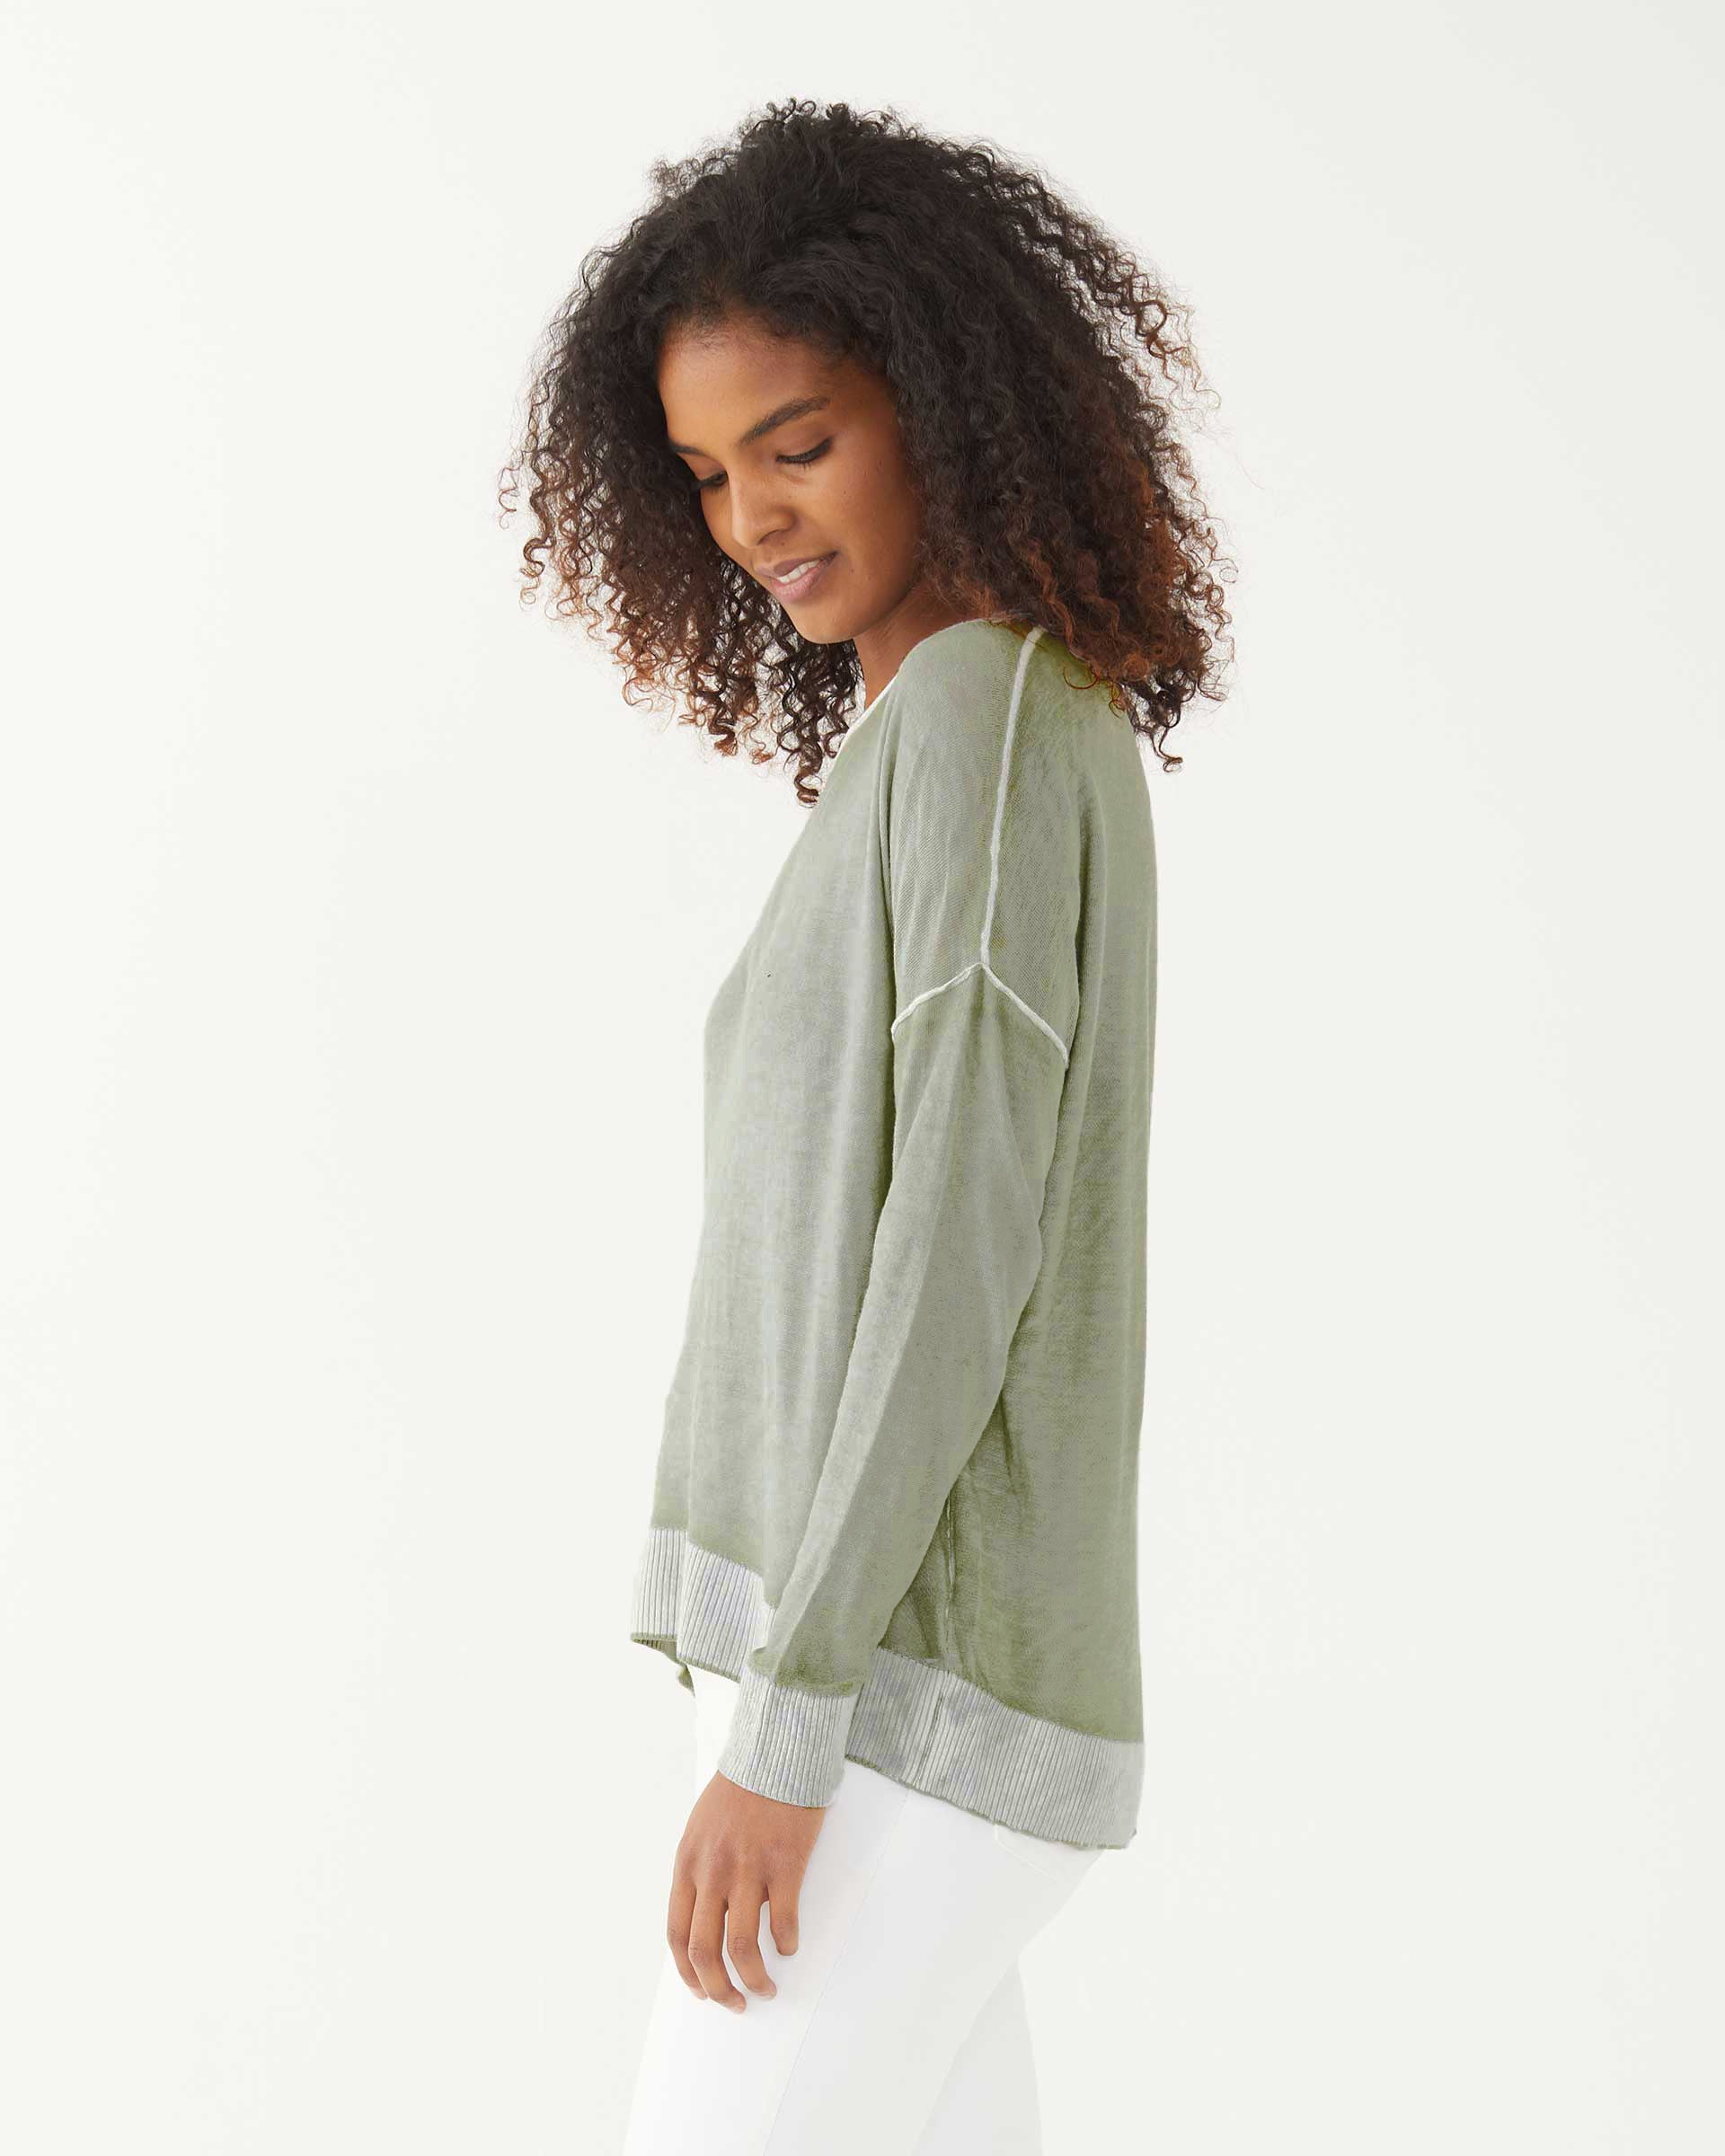 female wearing sea moss green hand-dyed cashmere sweater sideways on a white background